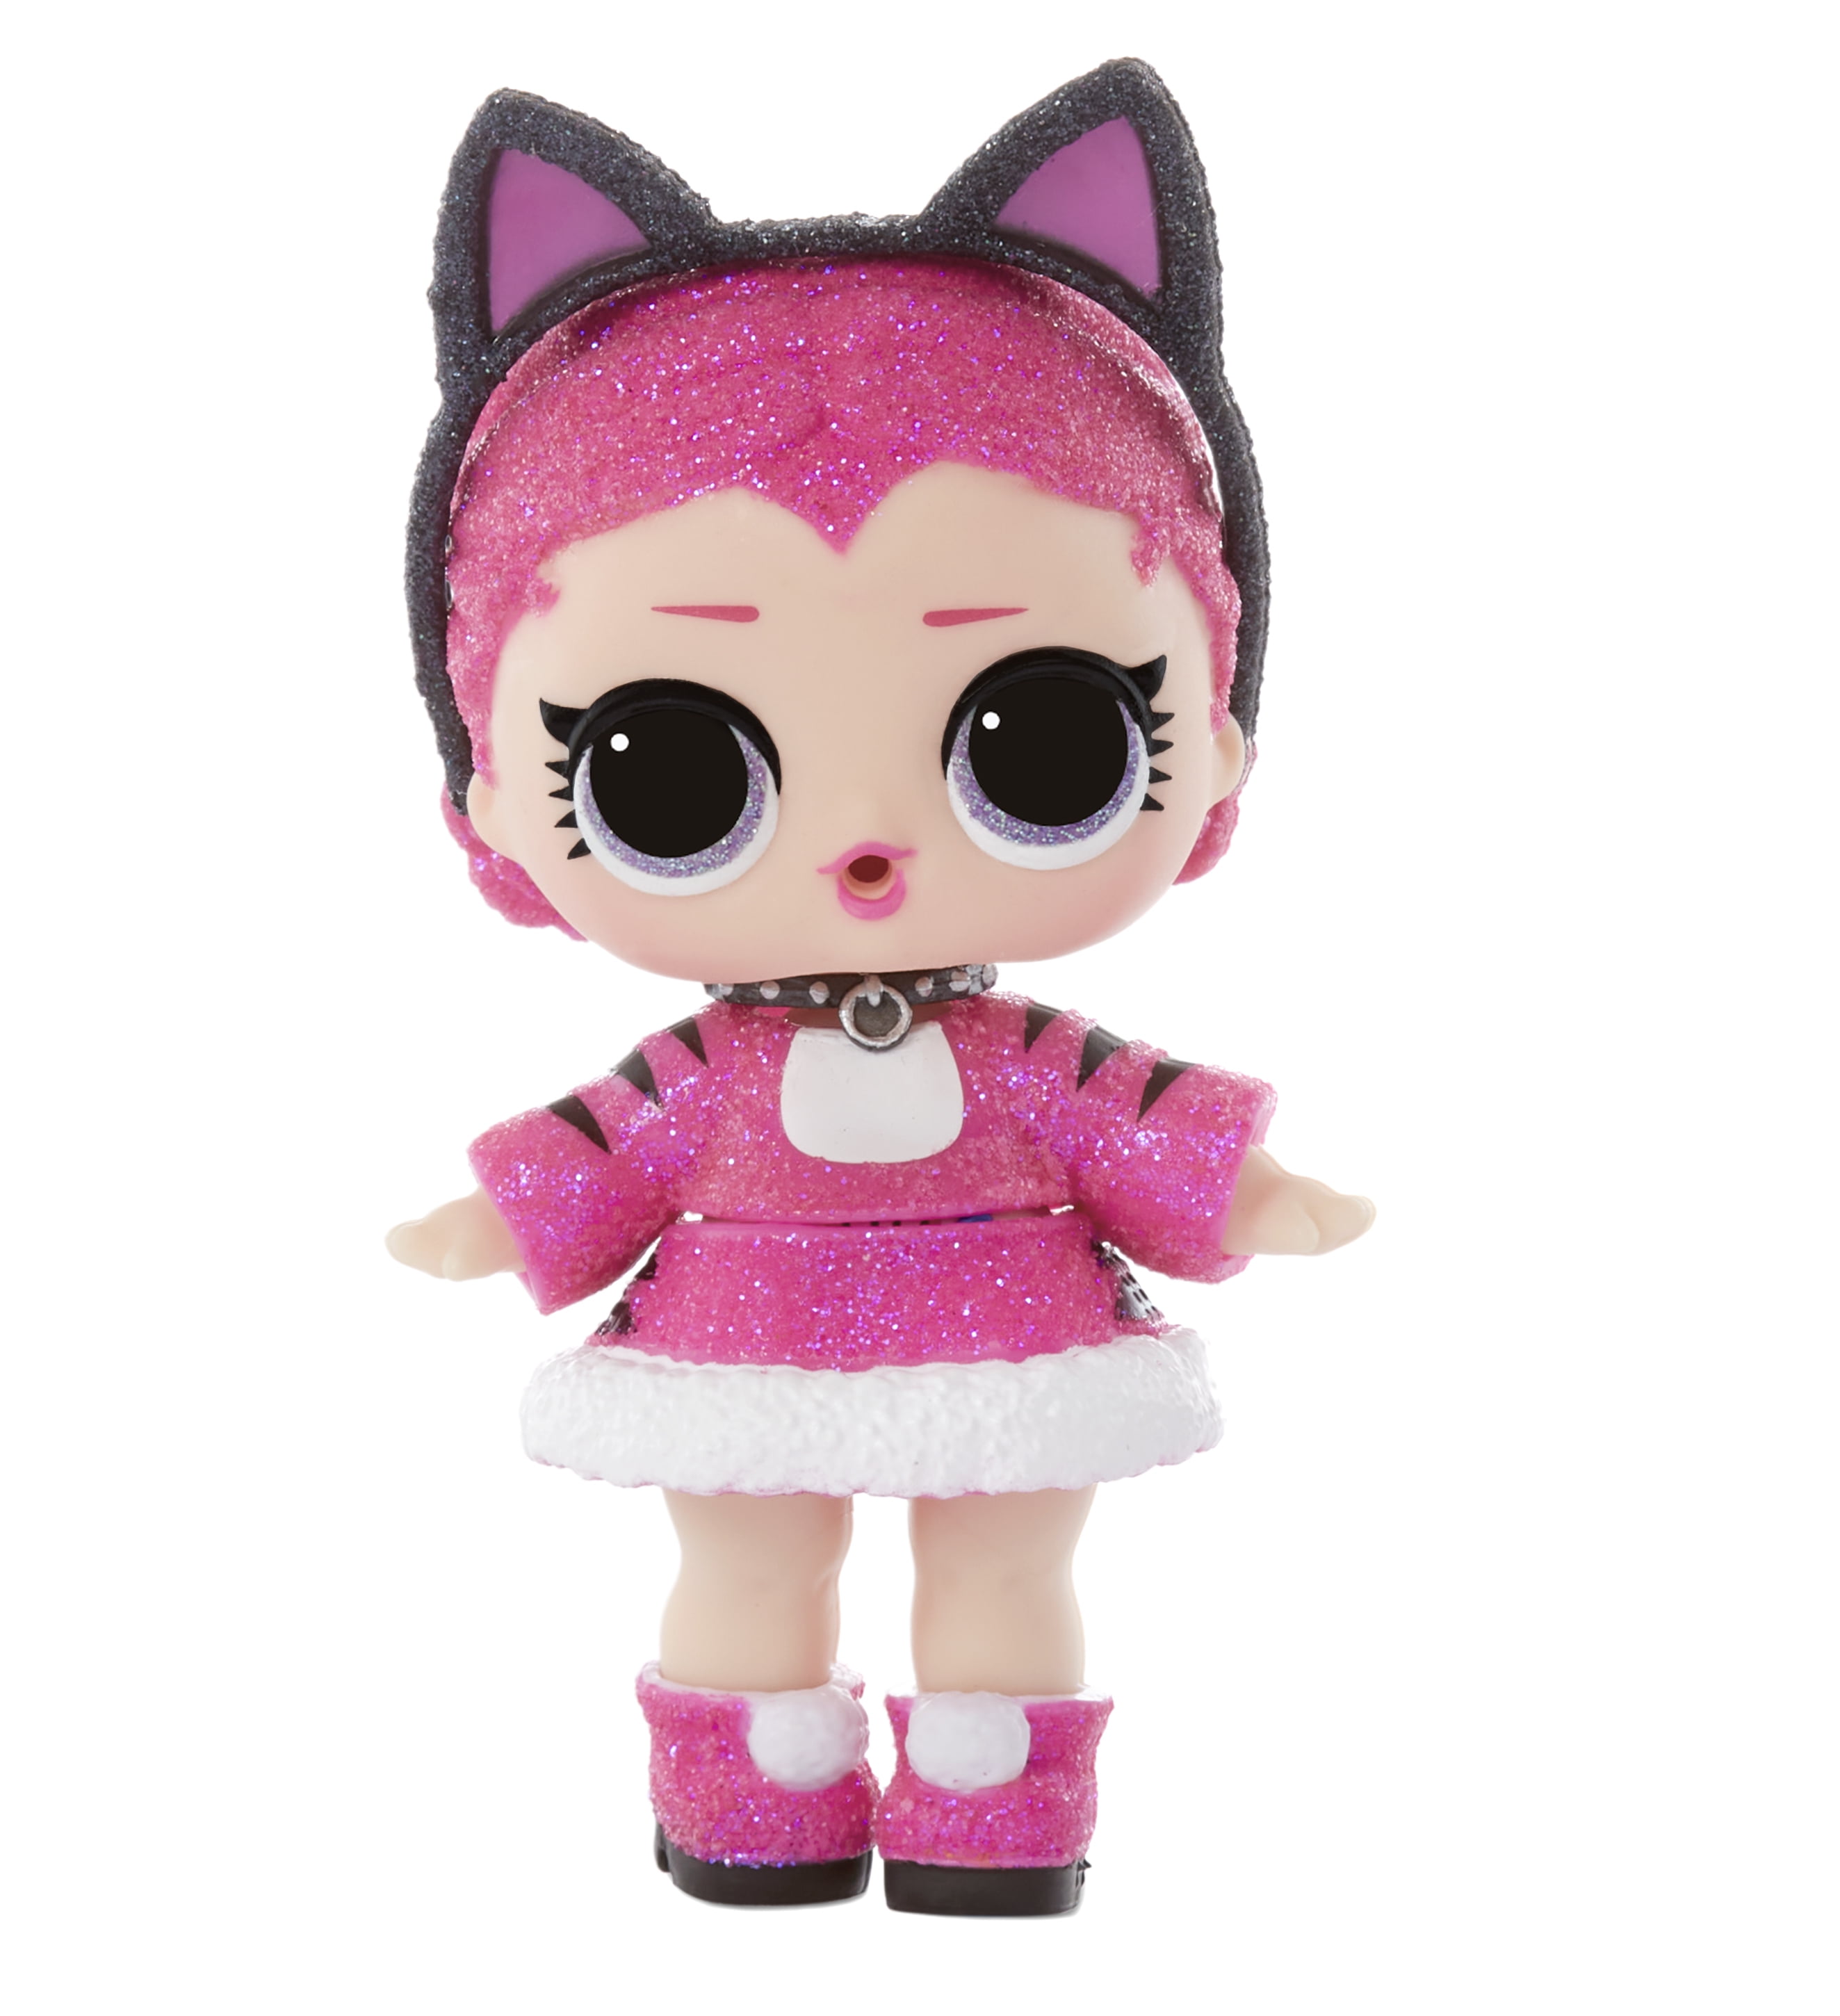 LOL Surprise Costume Glam Dolls With 7 Surprises Including Limited Edition Doll, Great Gift for Kids Ages 4 5 6+ - Walmart.com